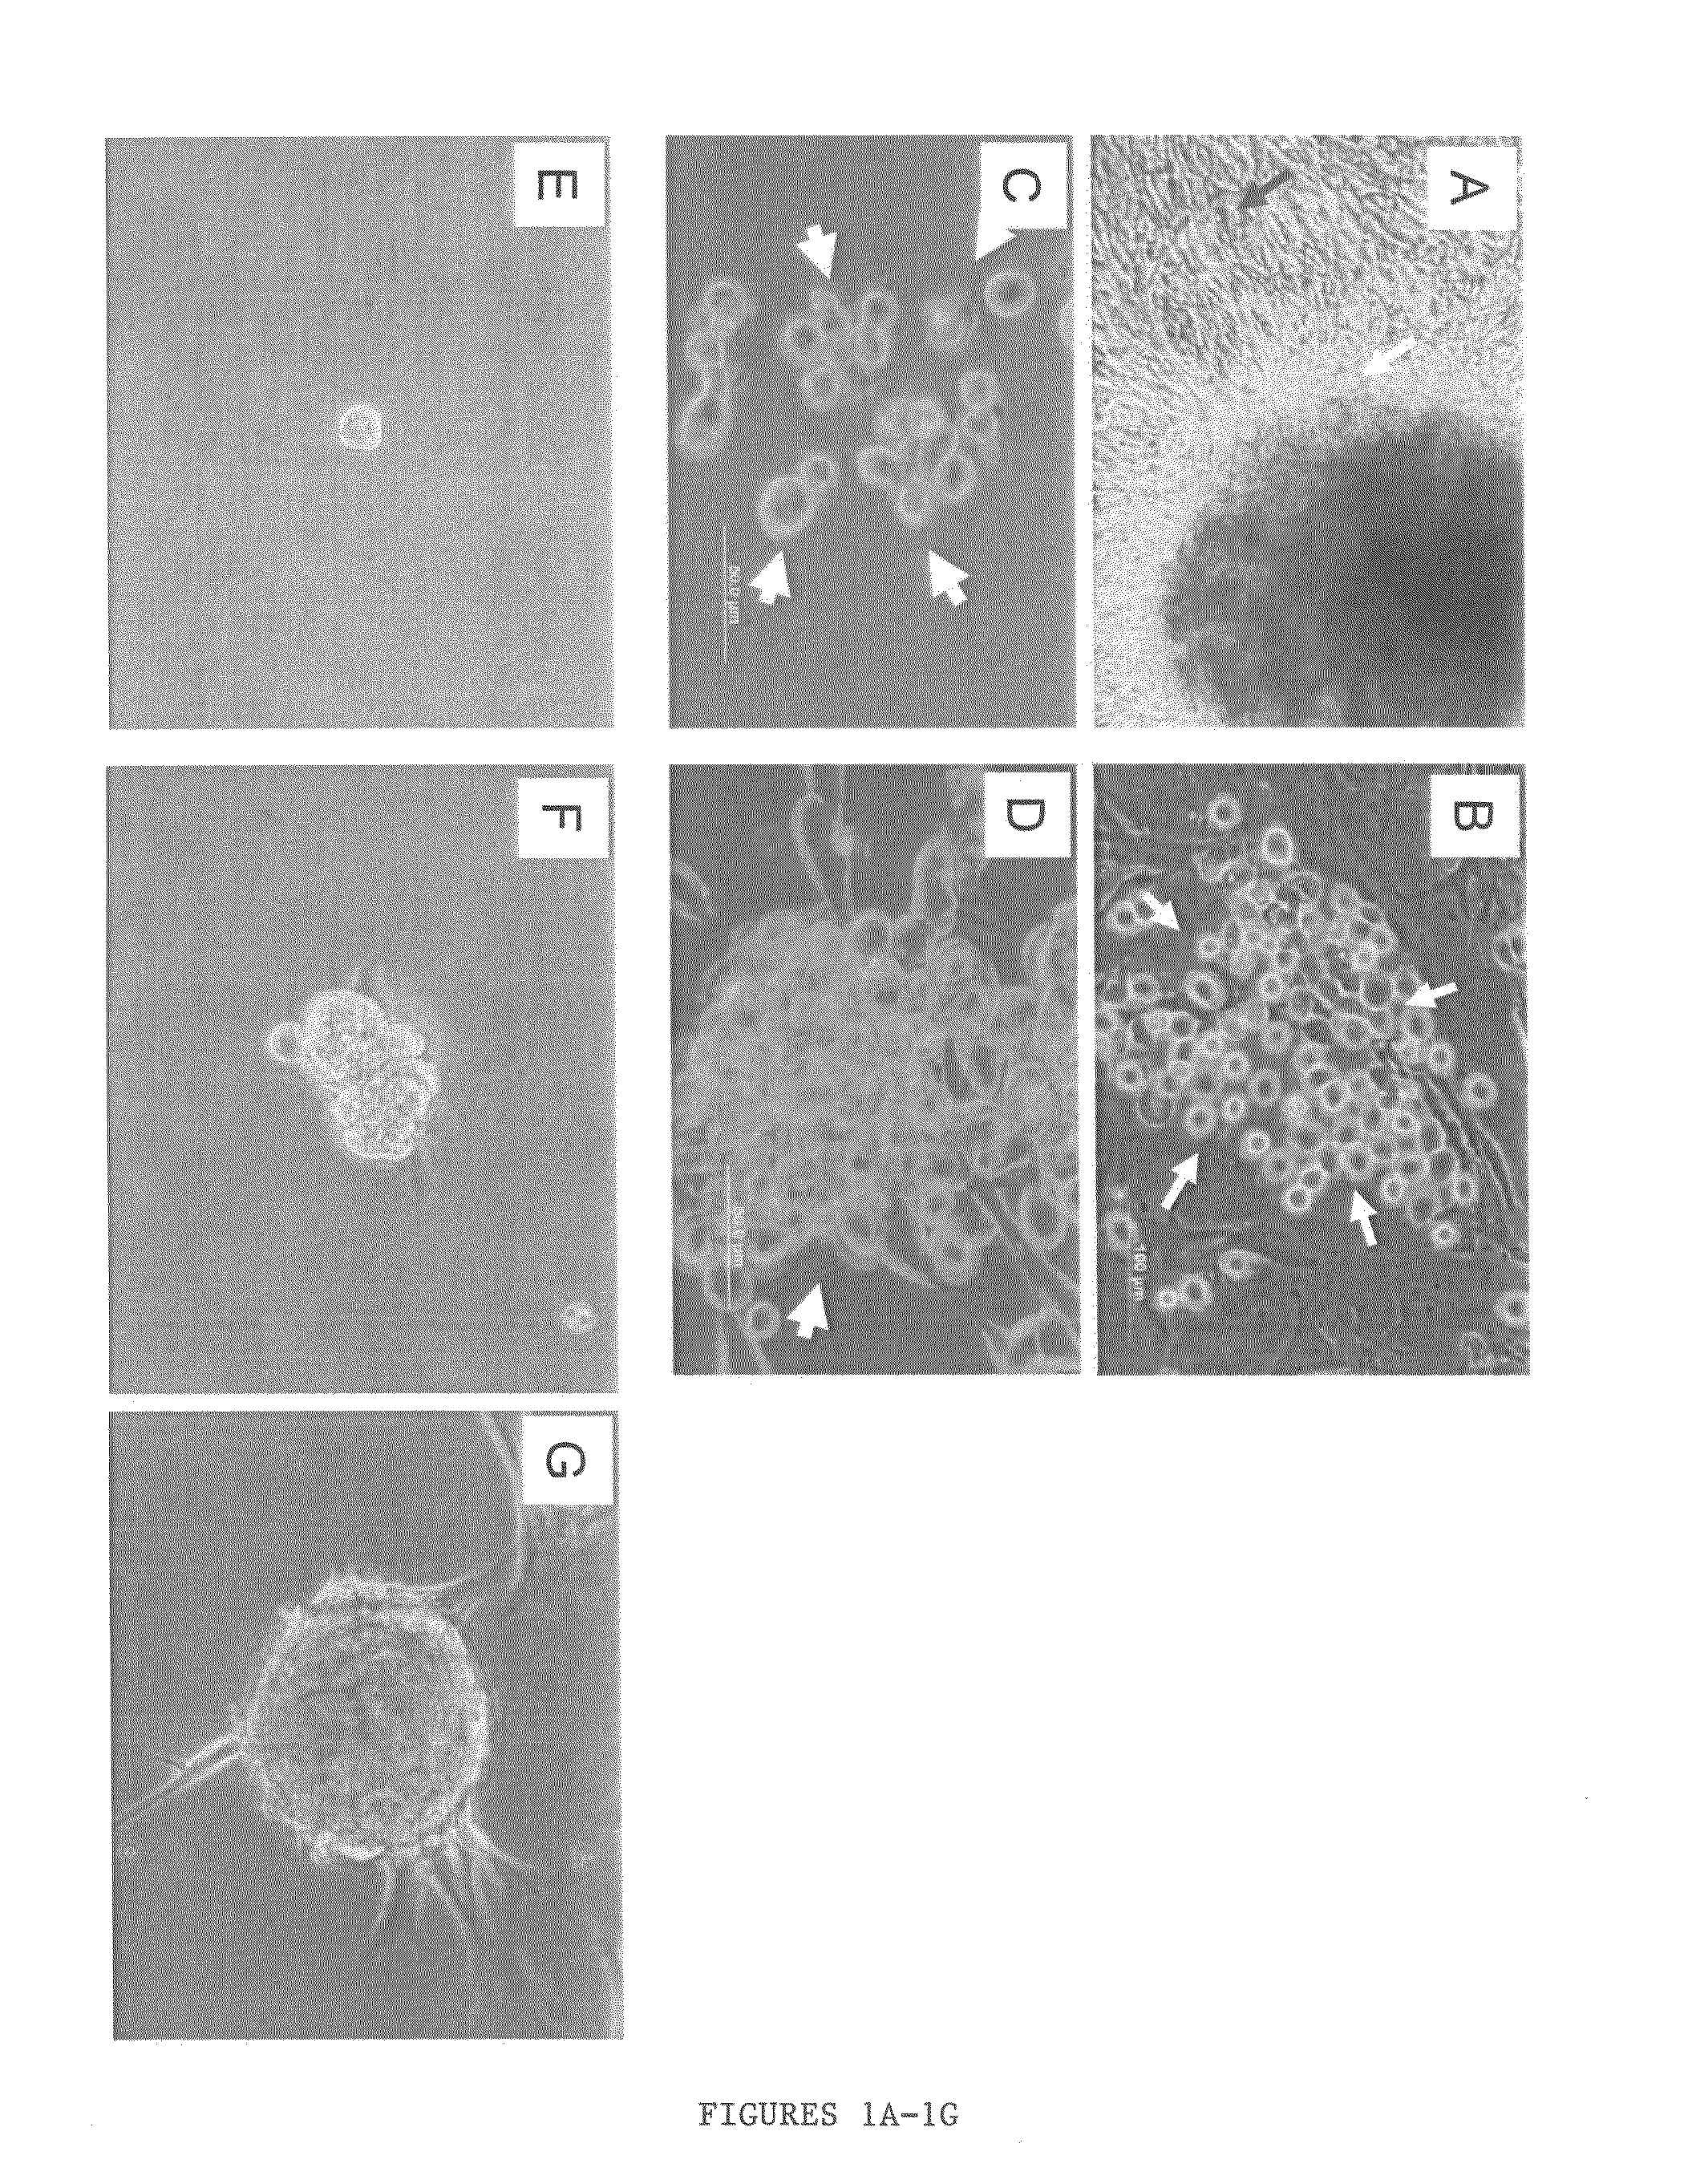 Enriched stem cell and progenitor cell populations, and methods of producing and using such populations